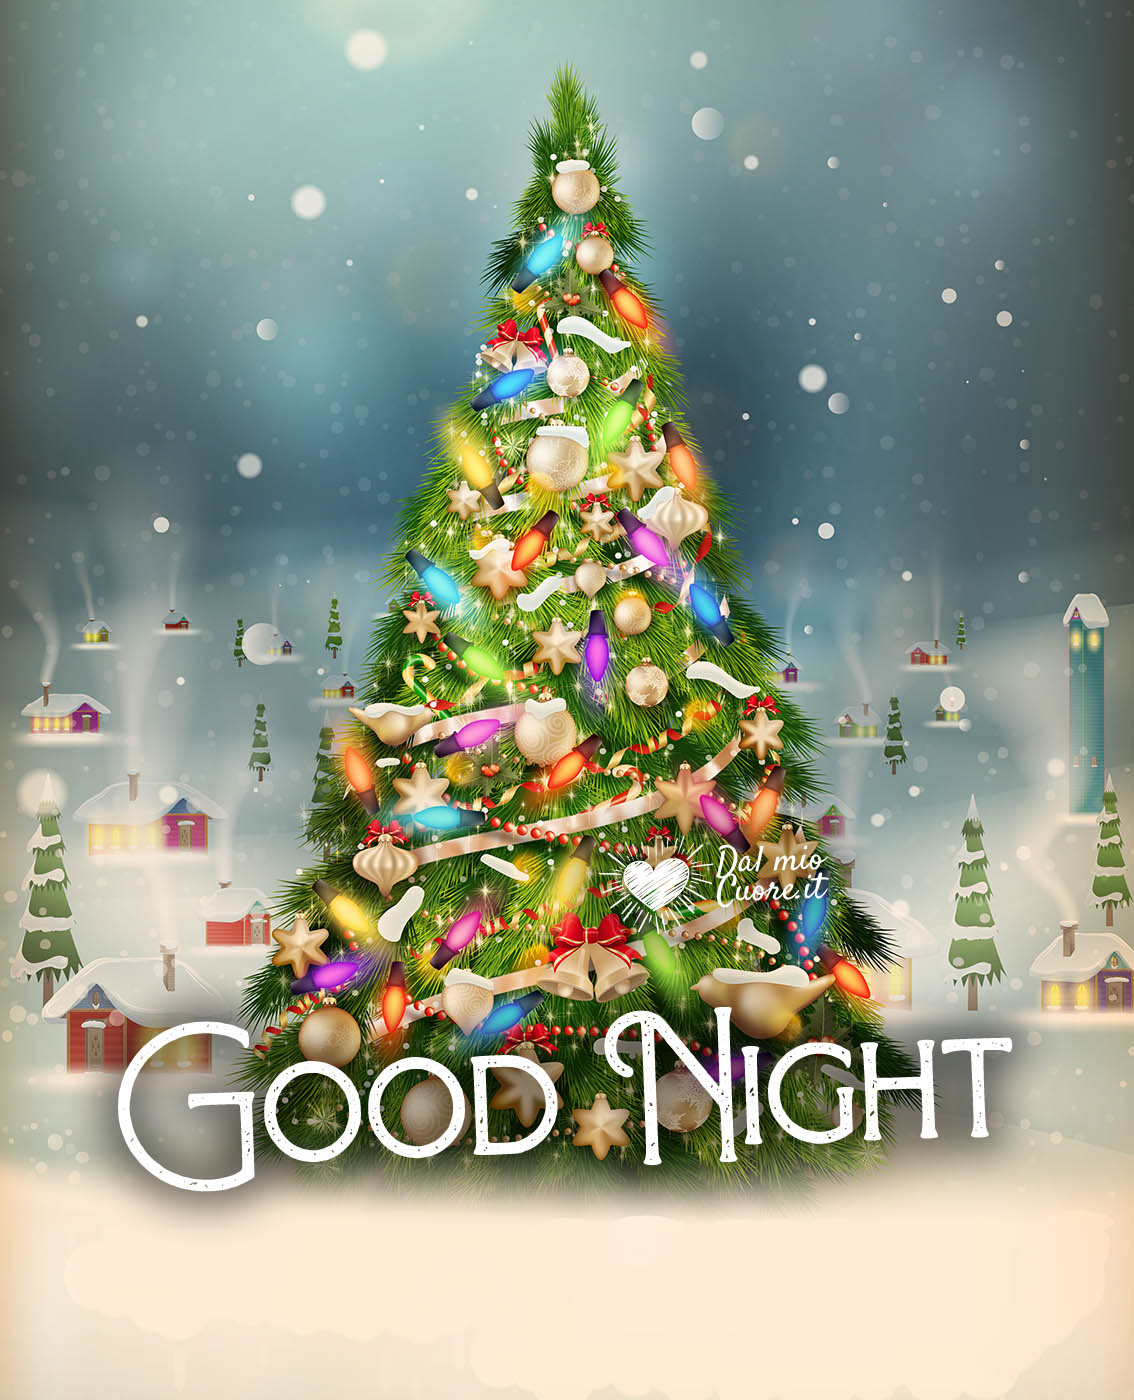 holiday good night images